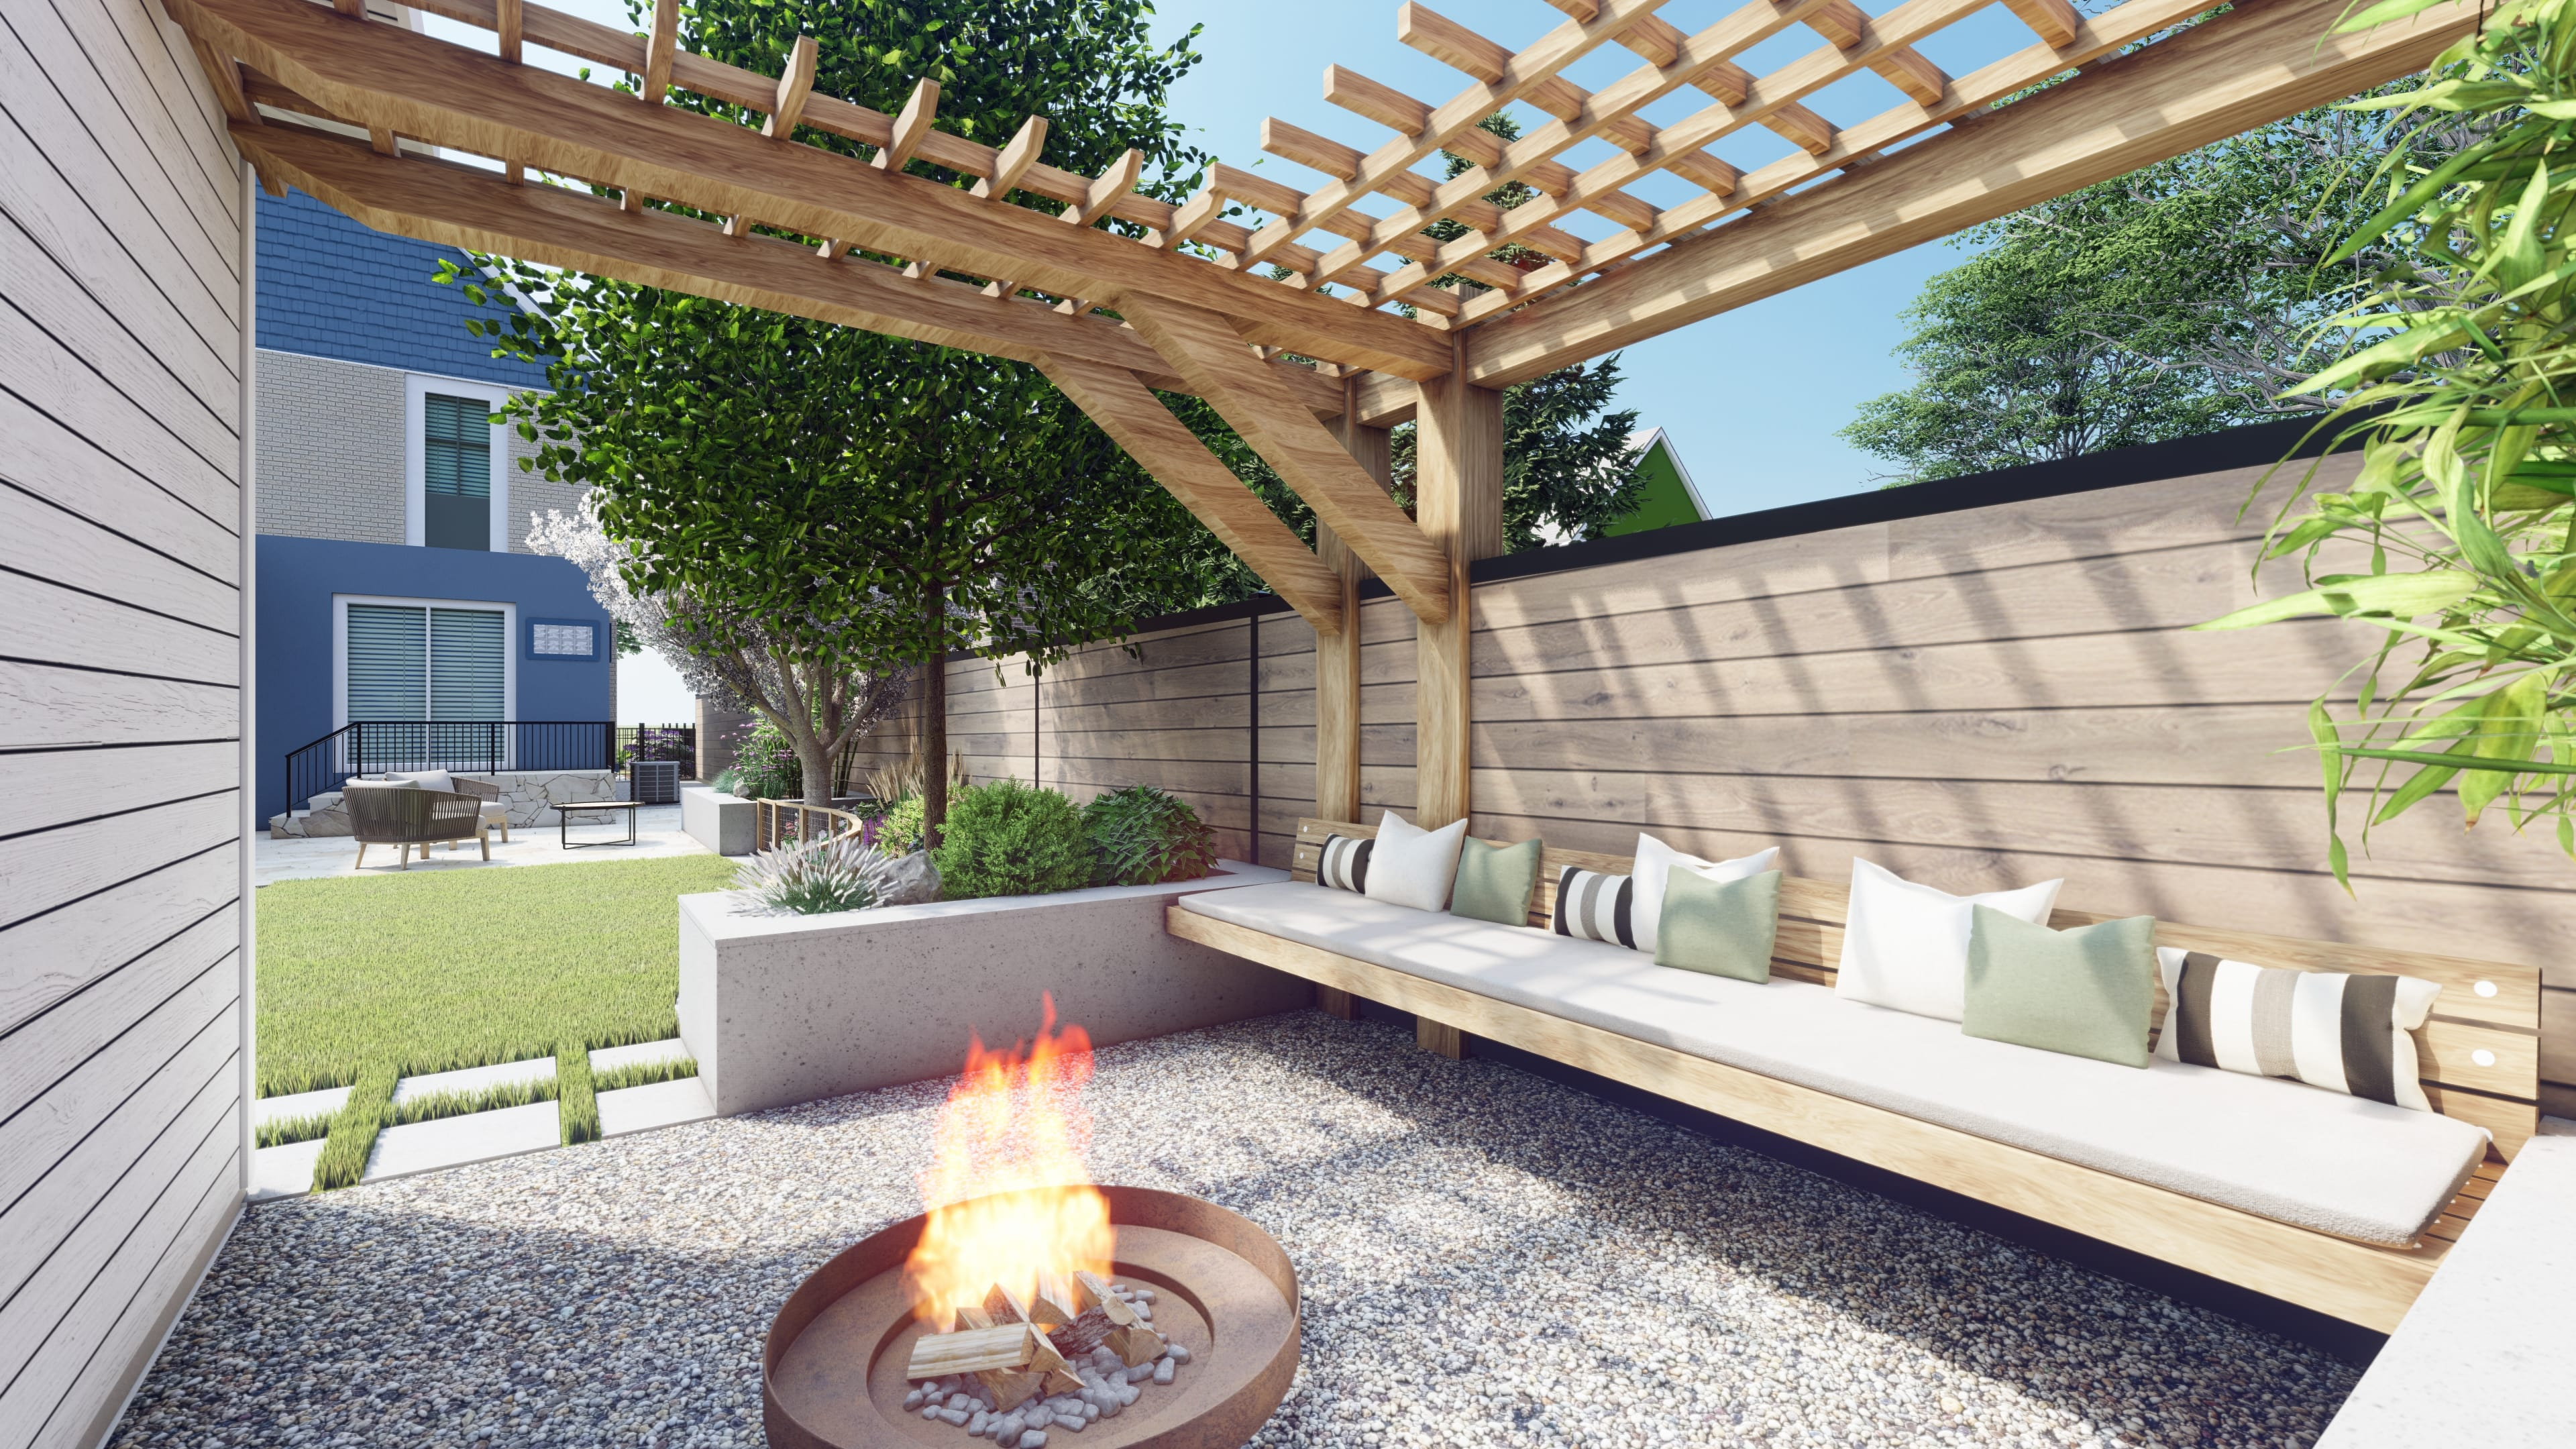 A landscape design with gravel fire pit area, turf grass and a patio